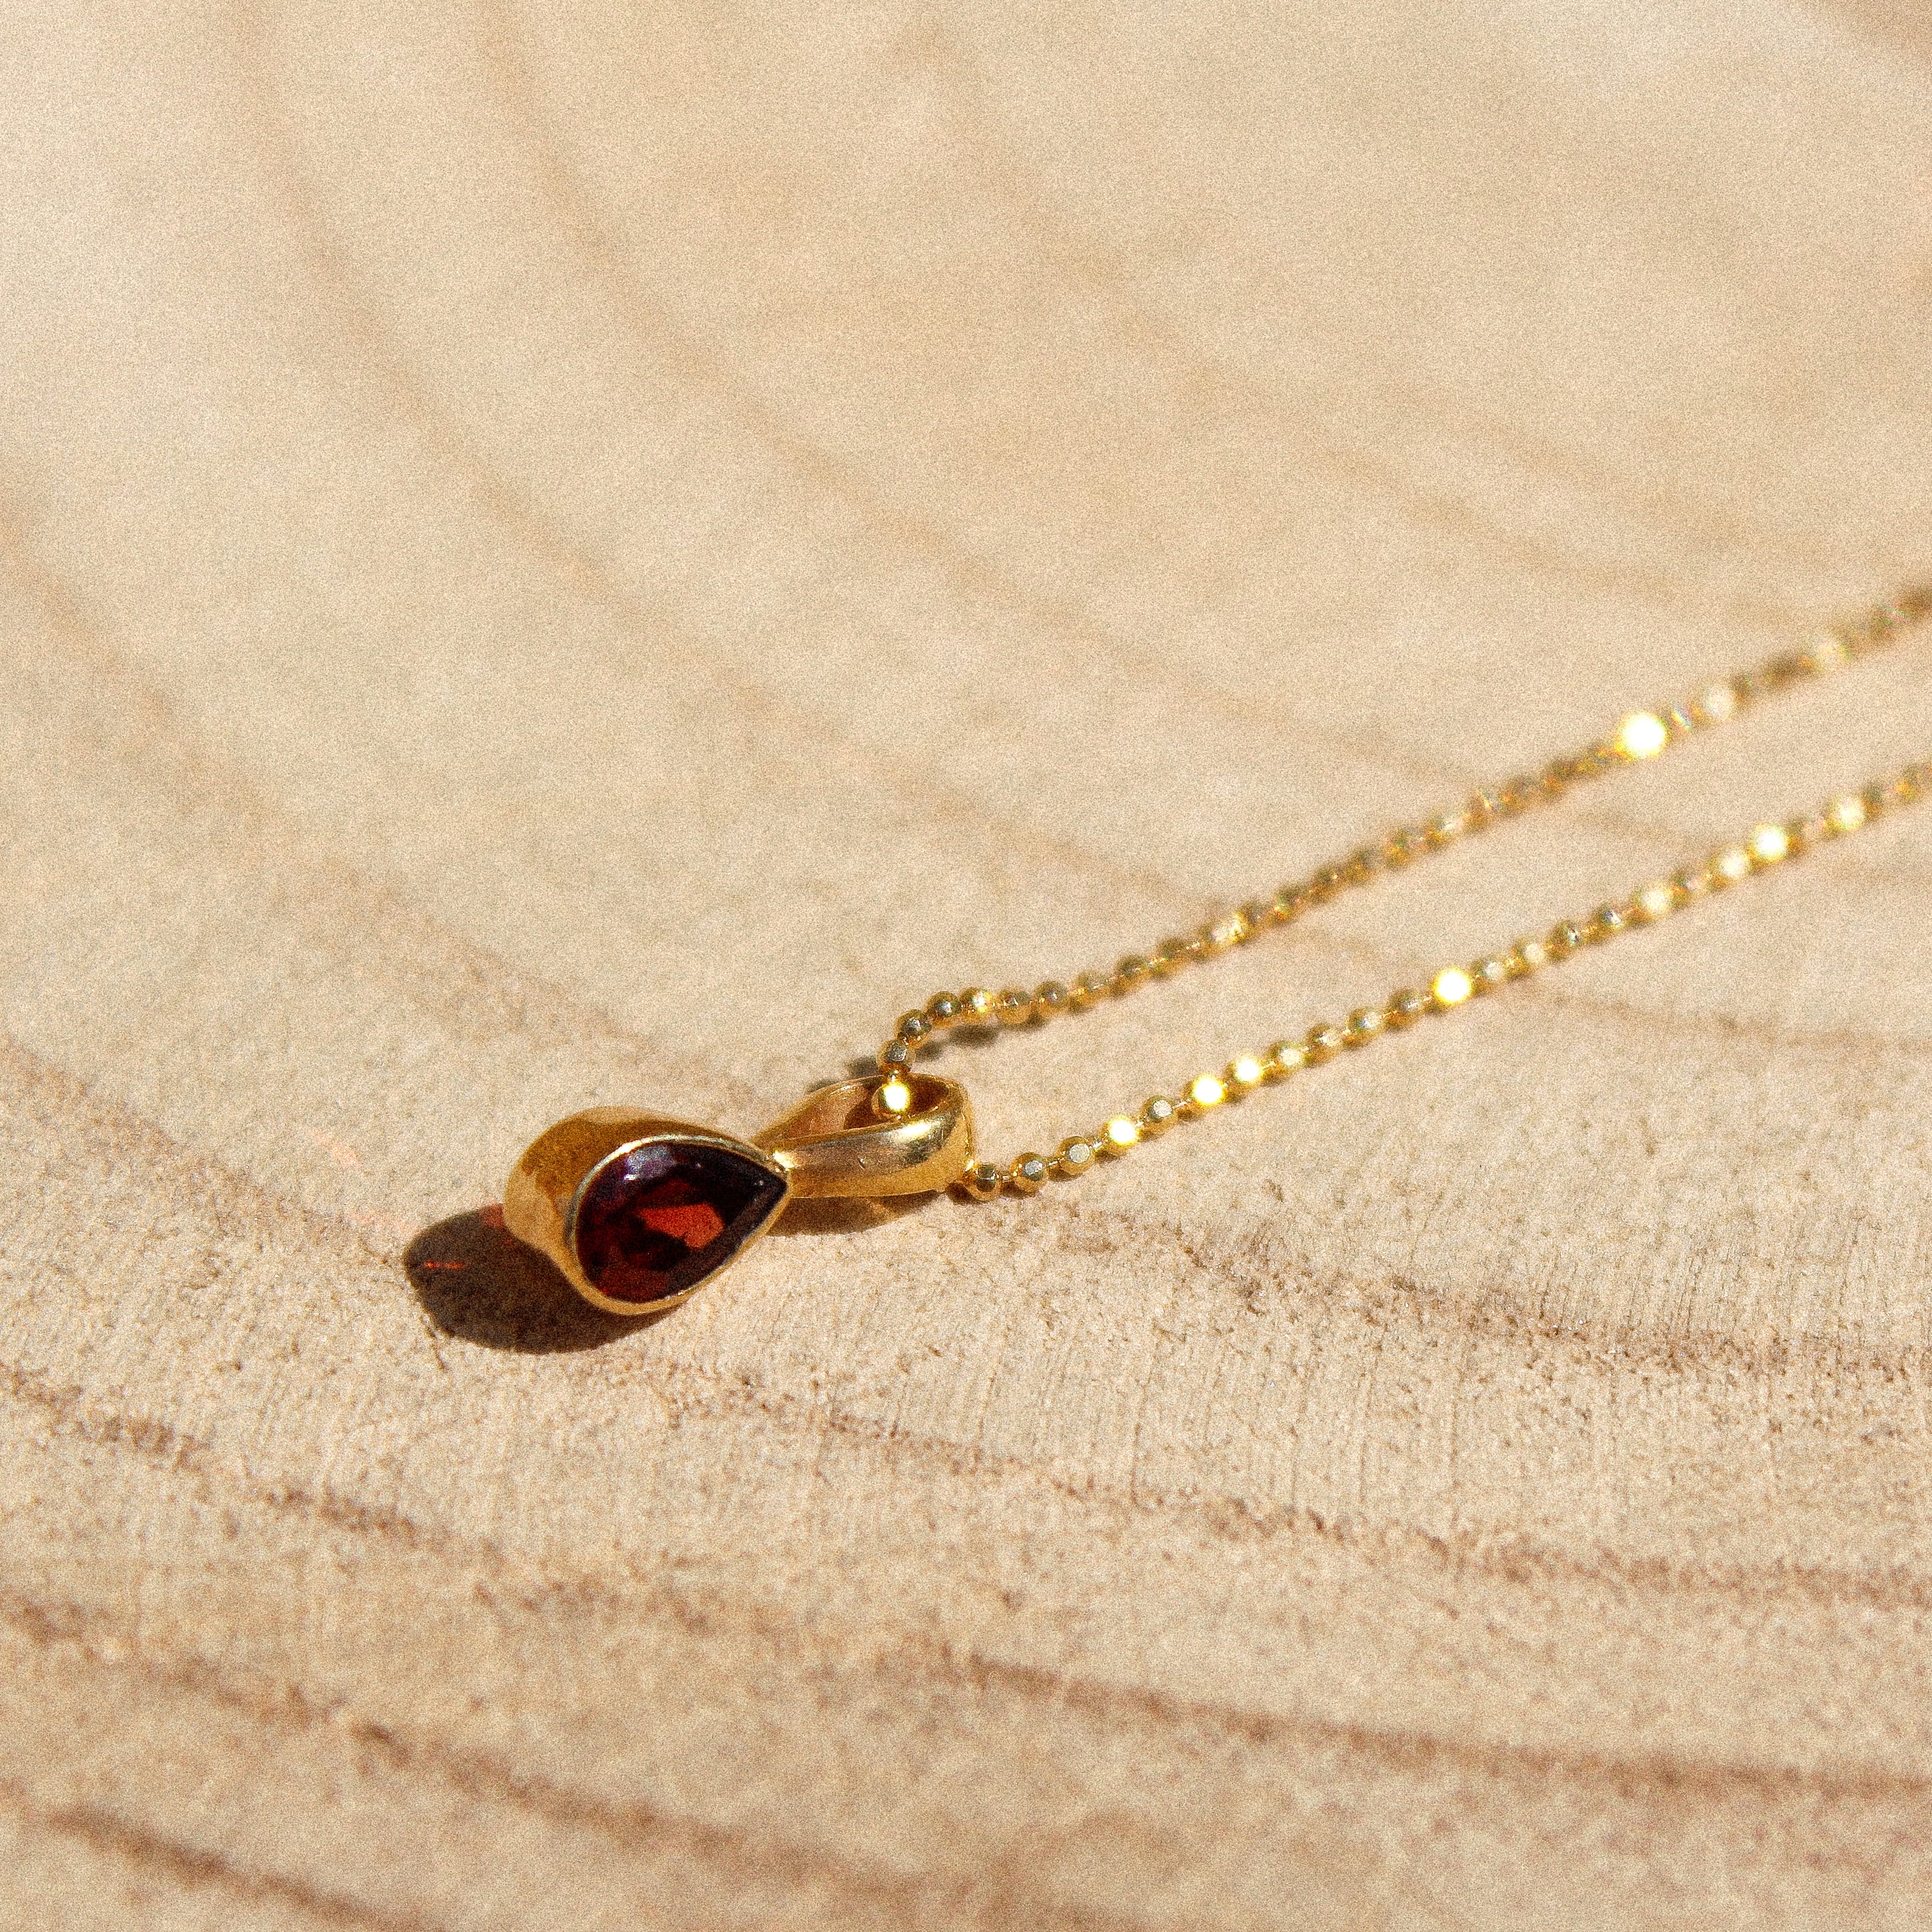 Magic drop necklace - Red Garnet cabochon (Gold plated)